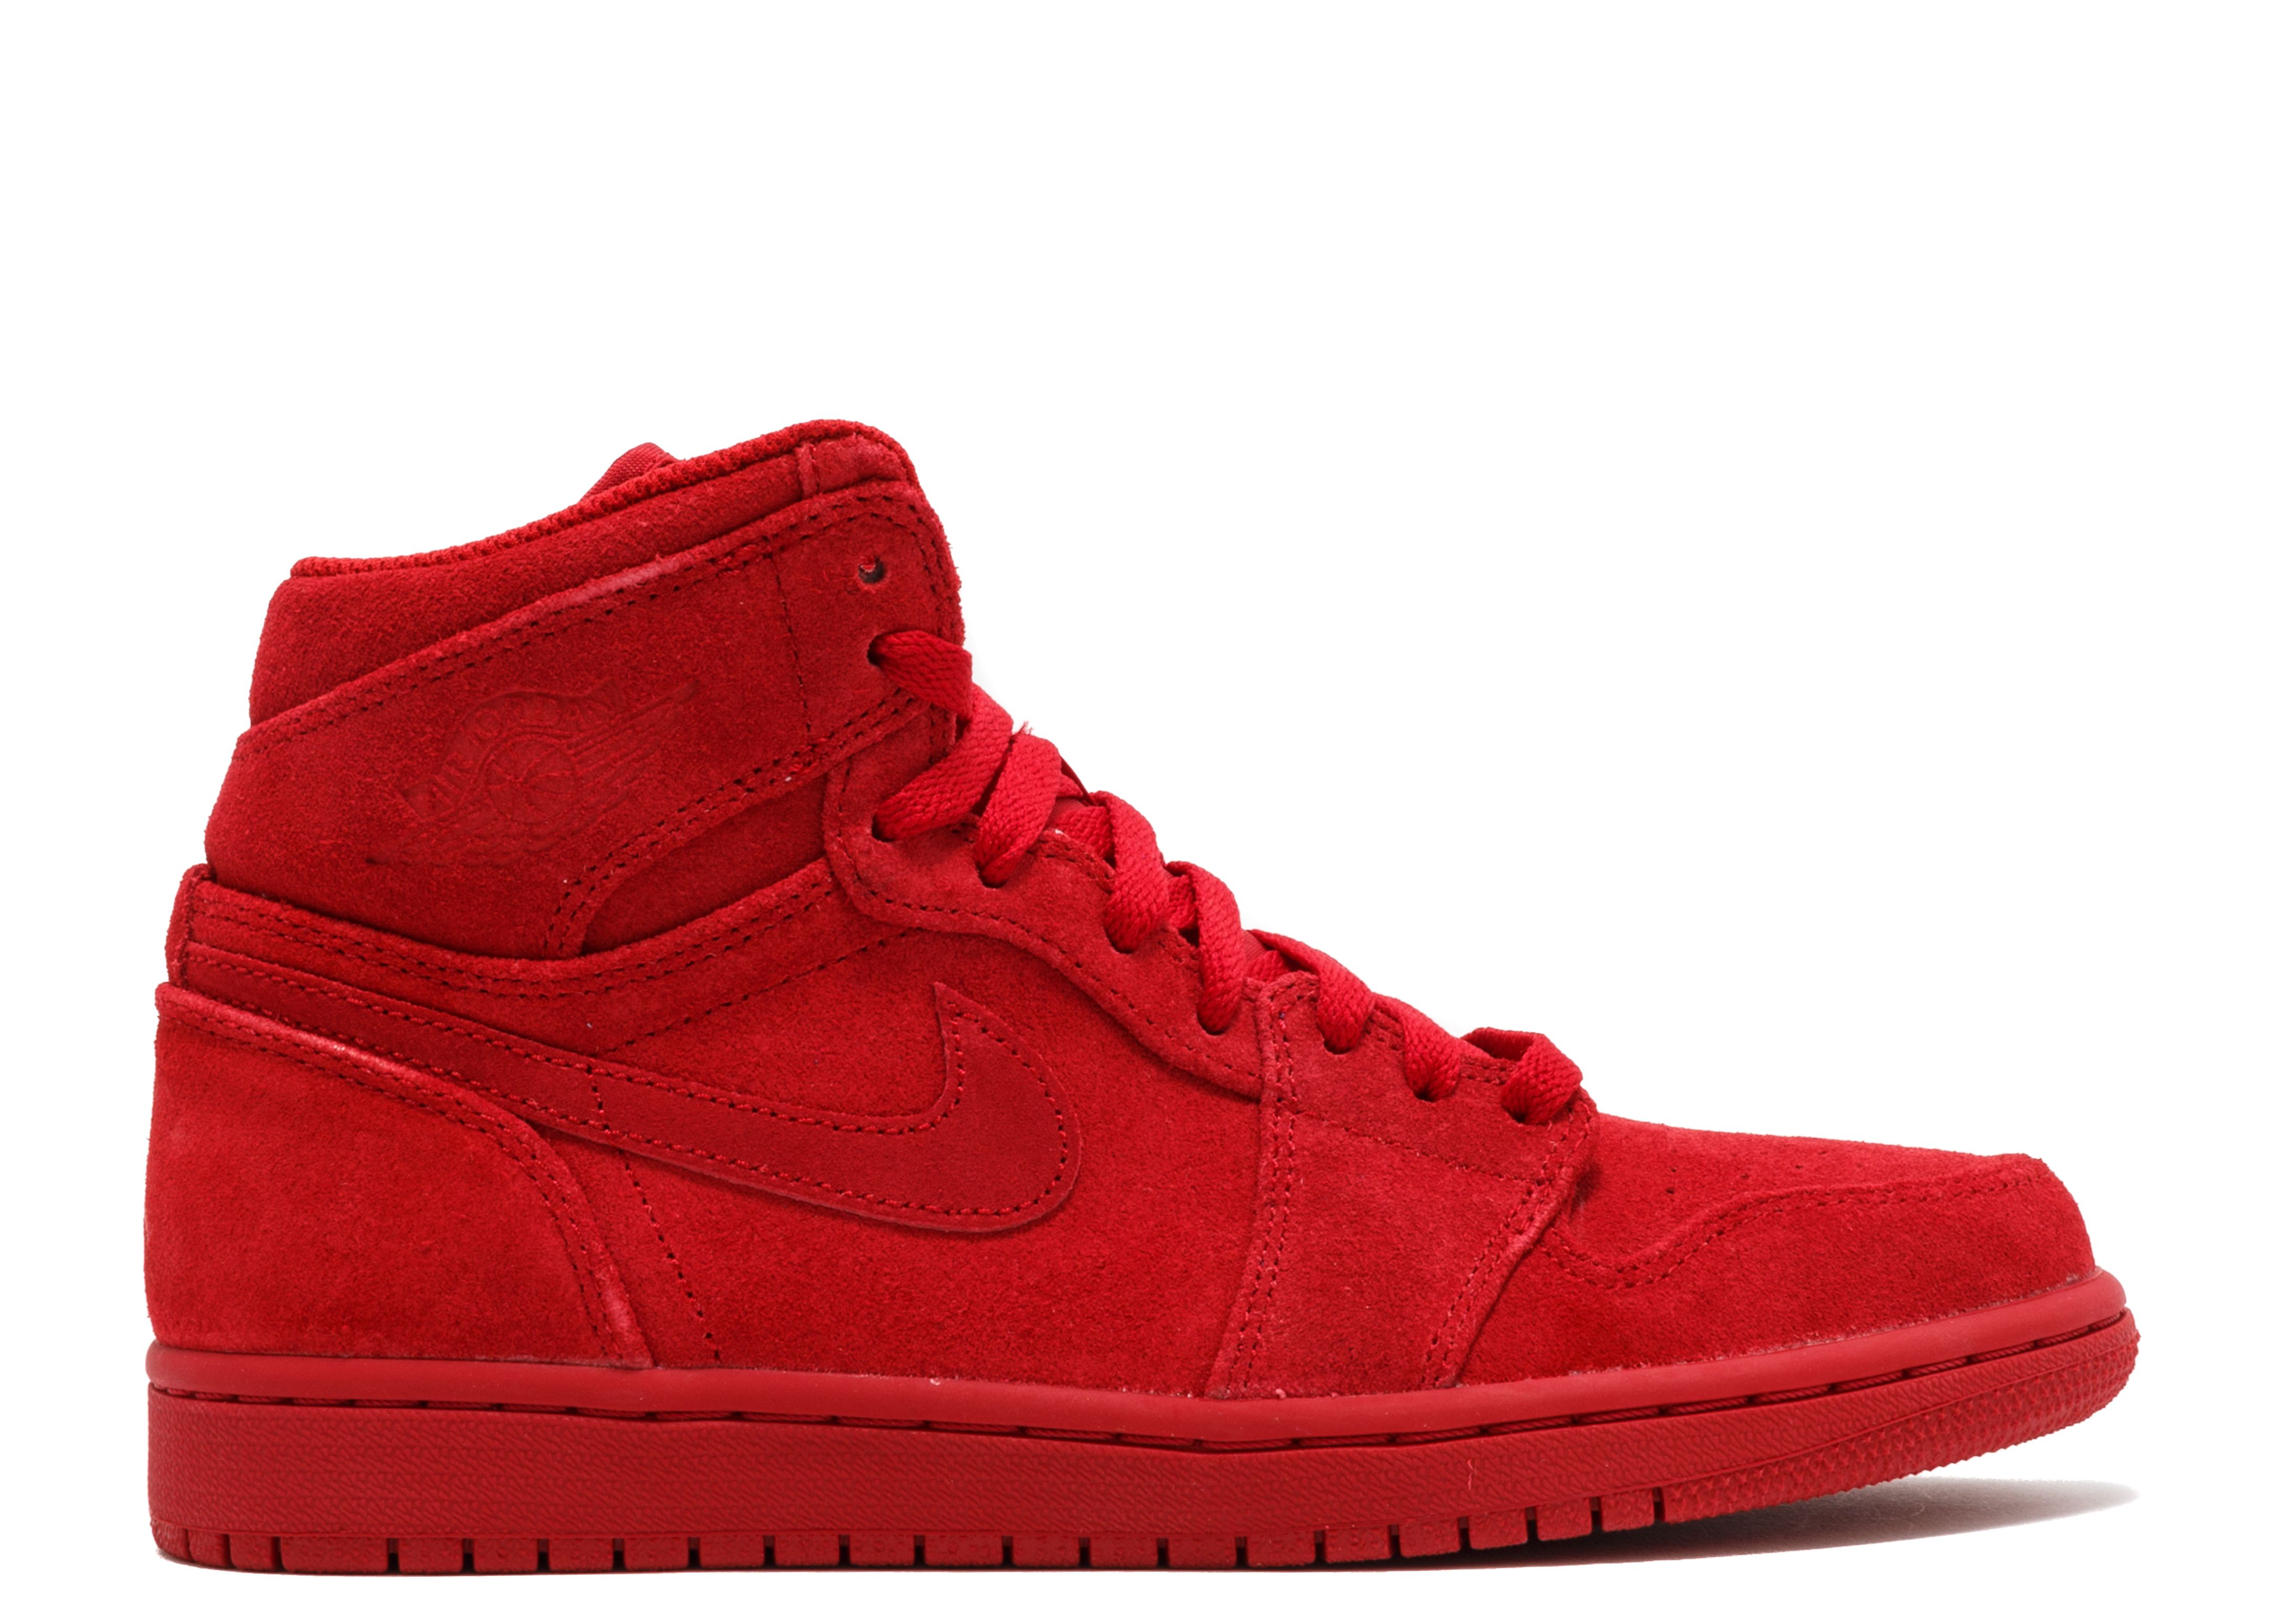 jordan 1s all red Sale,up to 65% Discounts